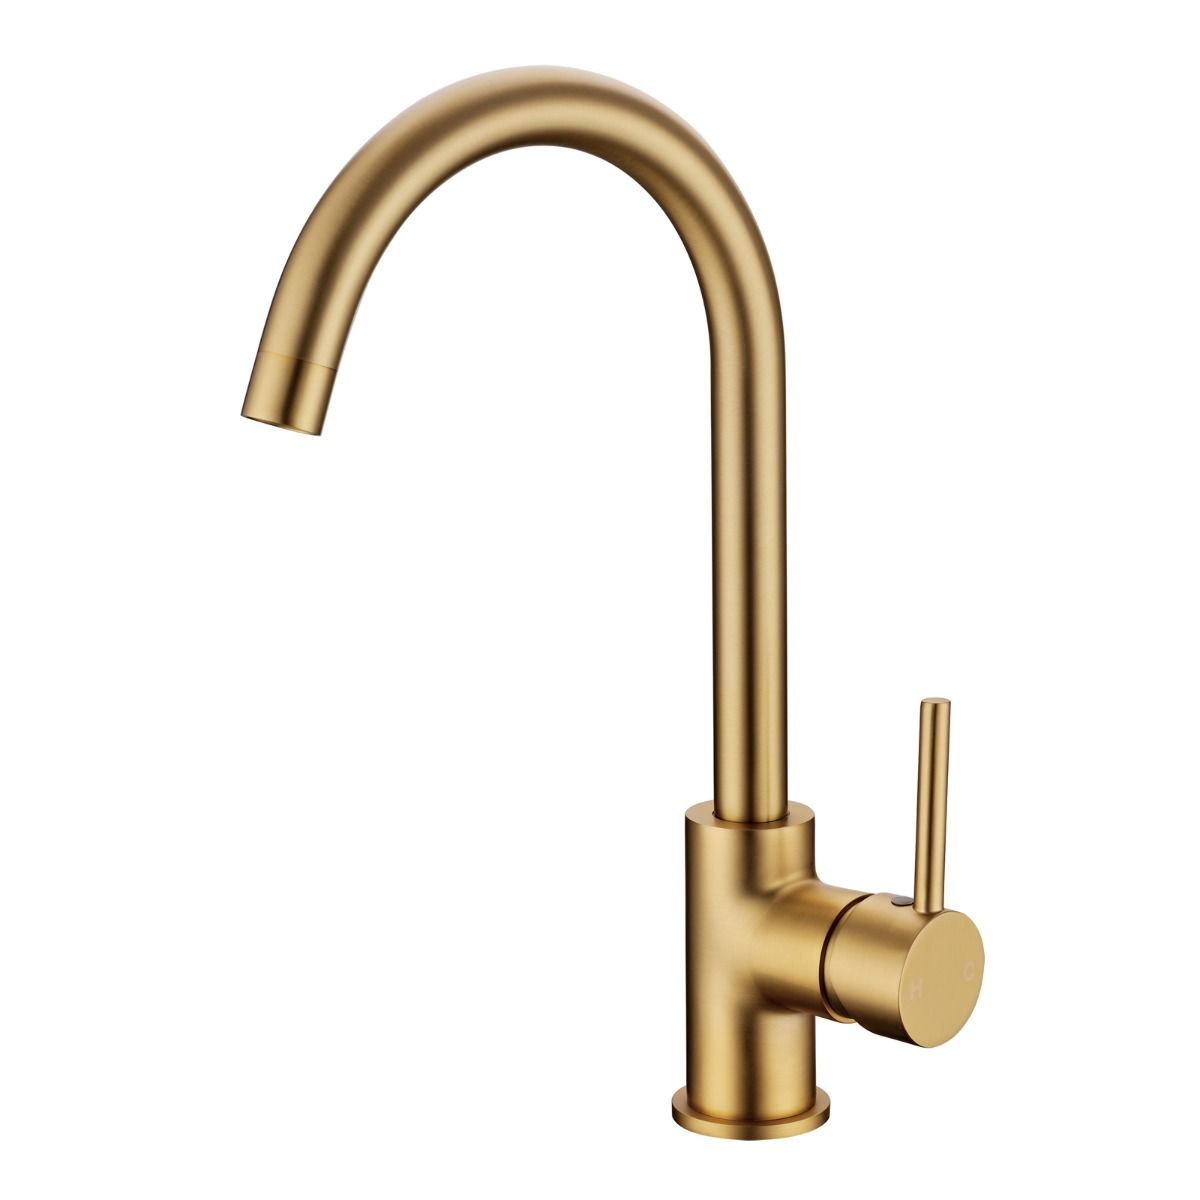 Goose neck basin mixer with pin handle Brushed Gold - KT26.04